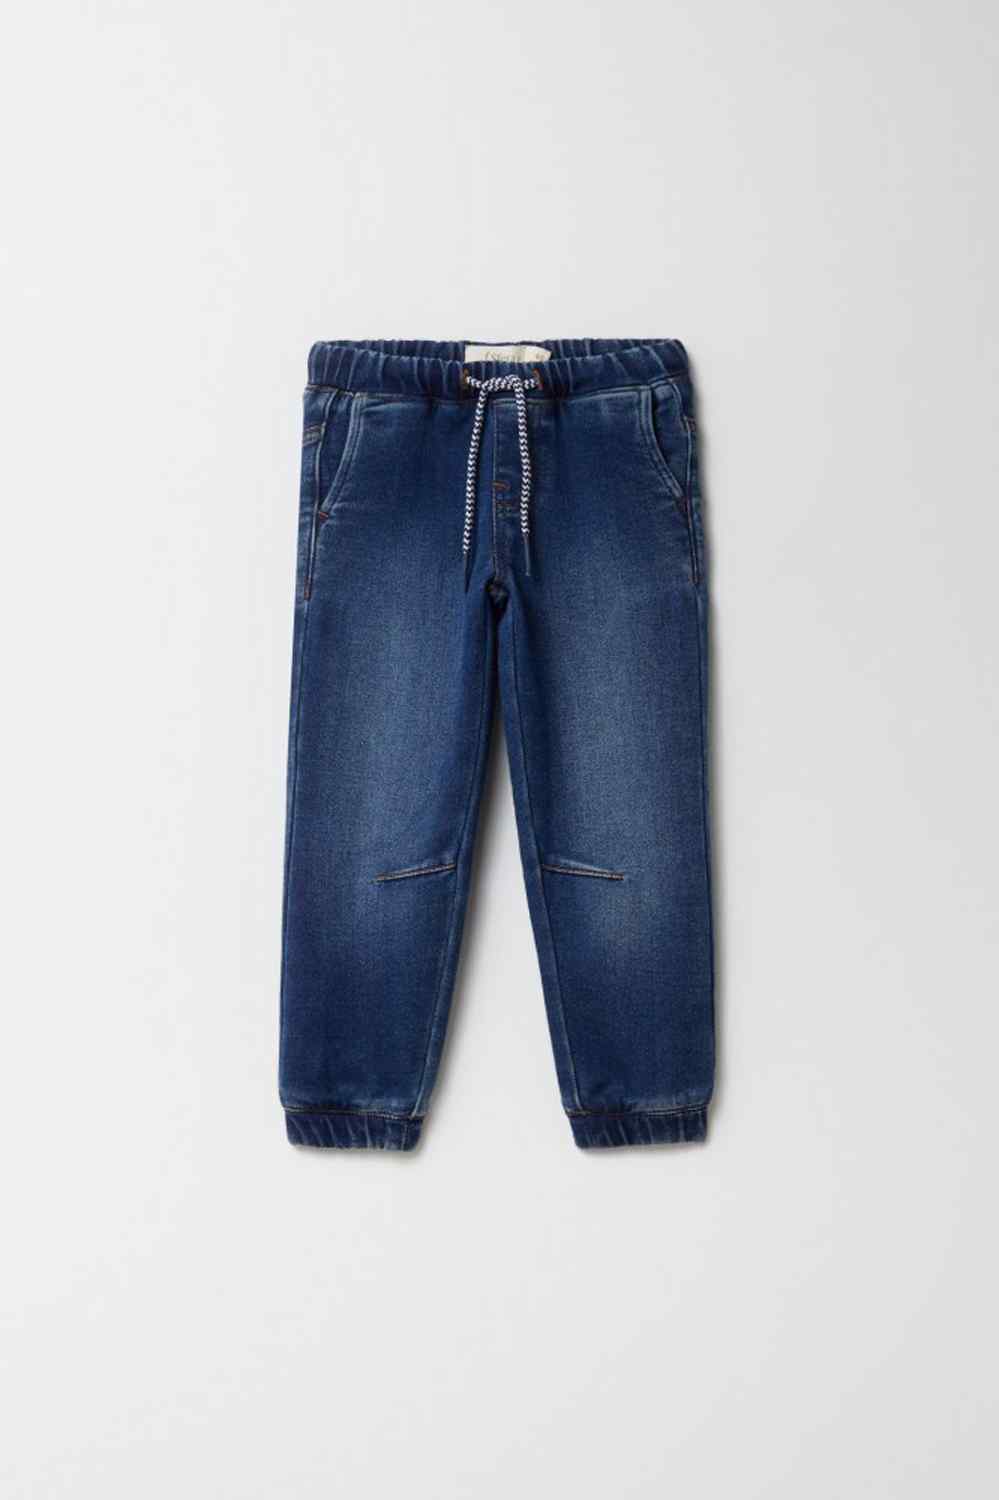 Sfera Casual Jeans With Drawstring - Blue 1 Shaws Department Stores